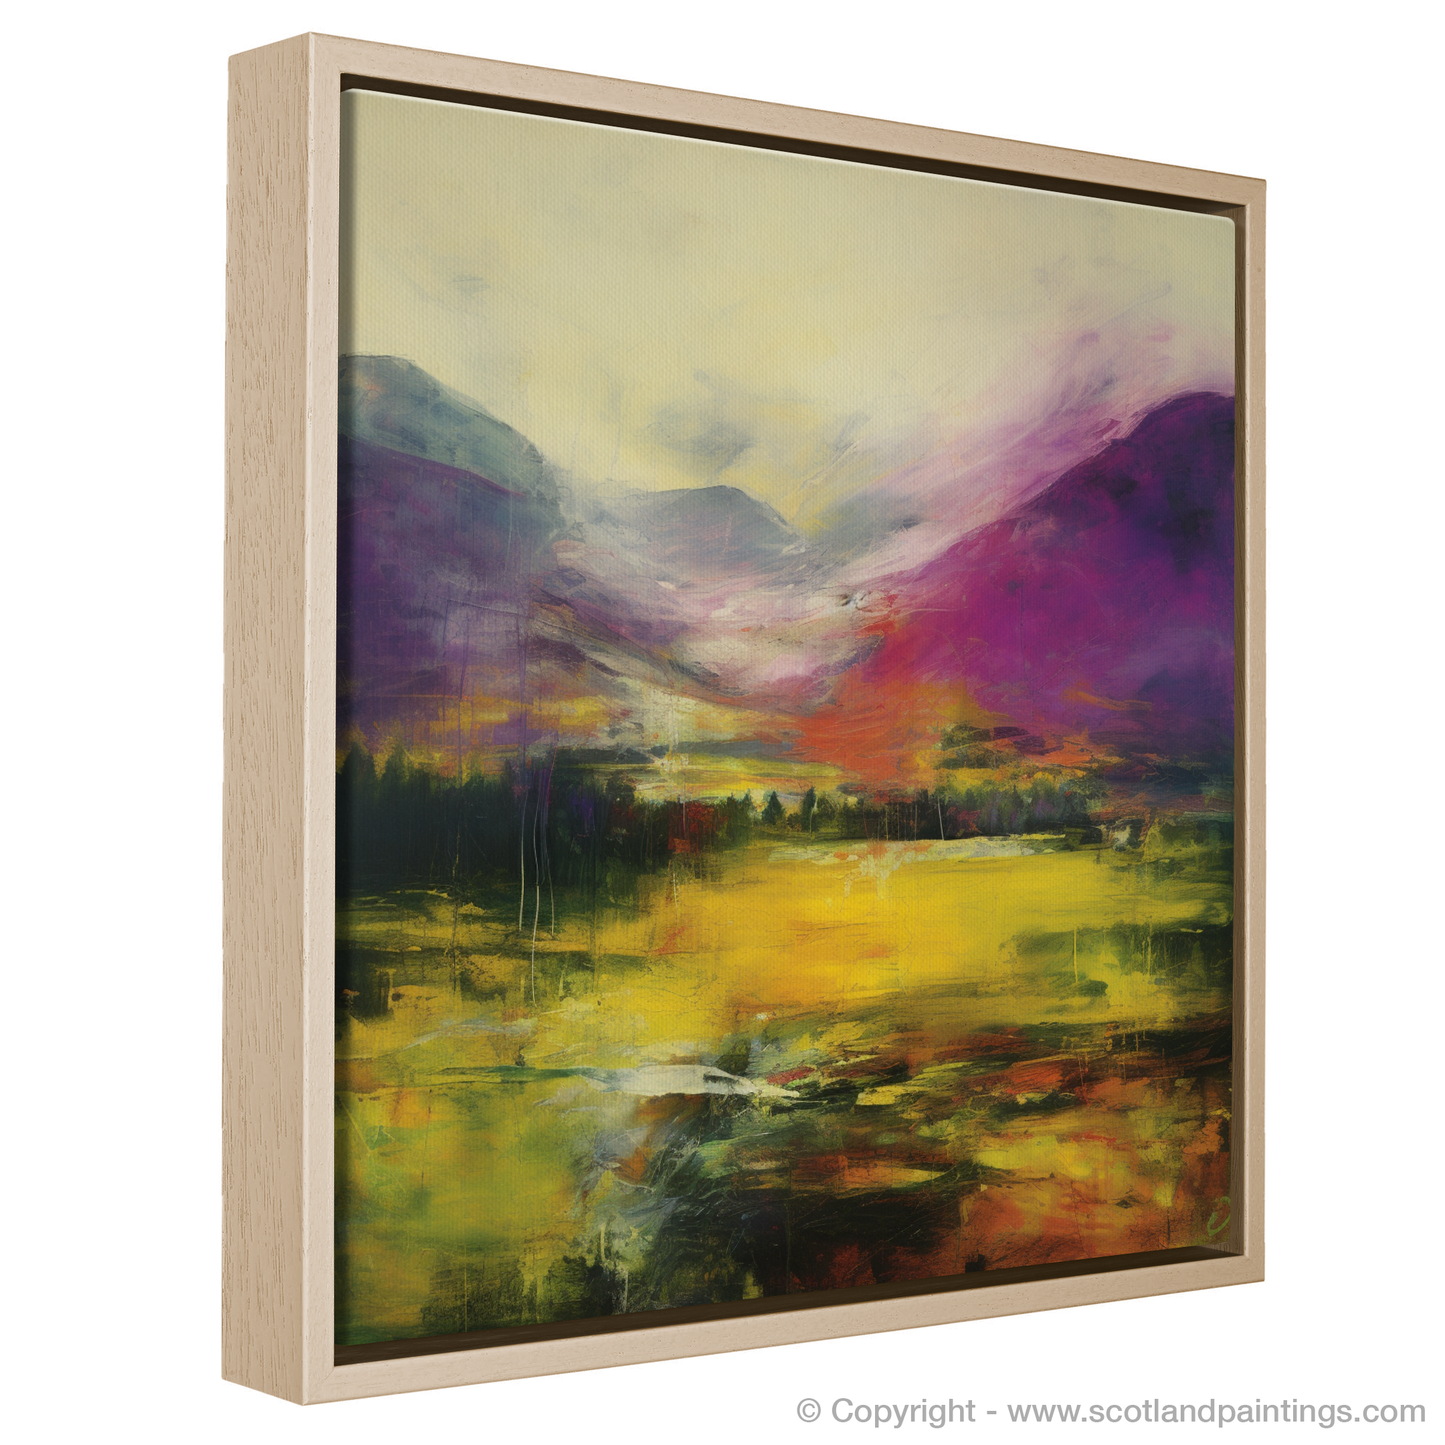 Painting and Art Print of Glen Orchy, Argyll and Bute entitled "Wild Symphony of Glen Orchy".